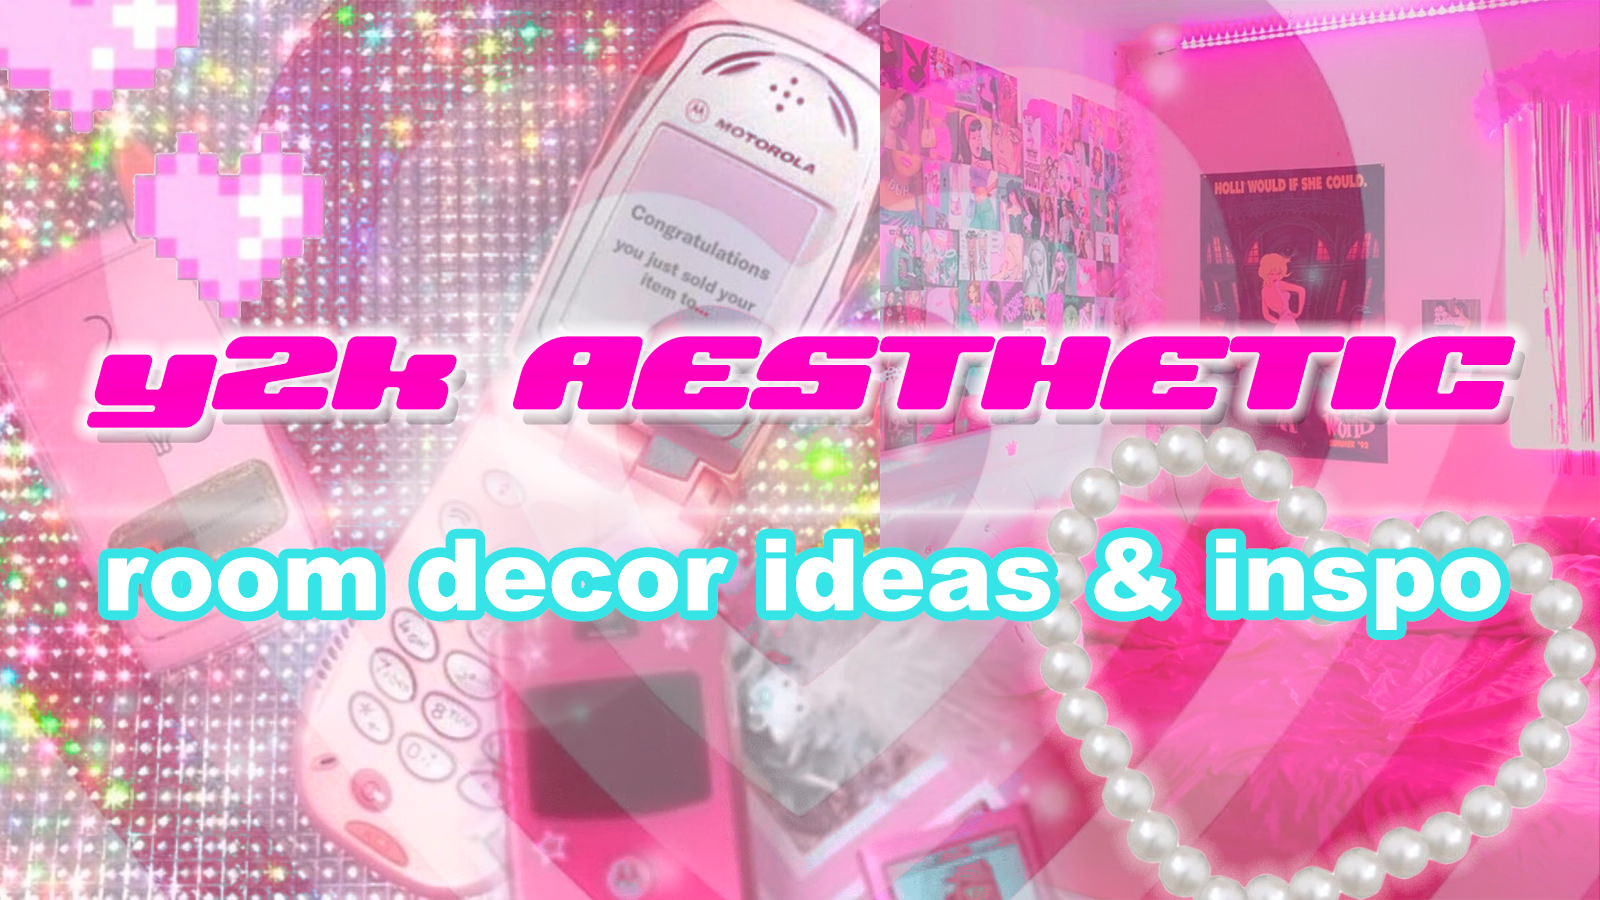 Throwback to the 2000's: Y2K Room Decor Ideas for the Nostalgic Millennial